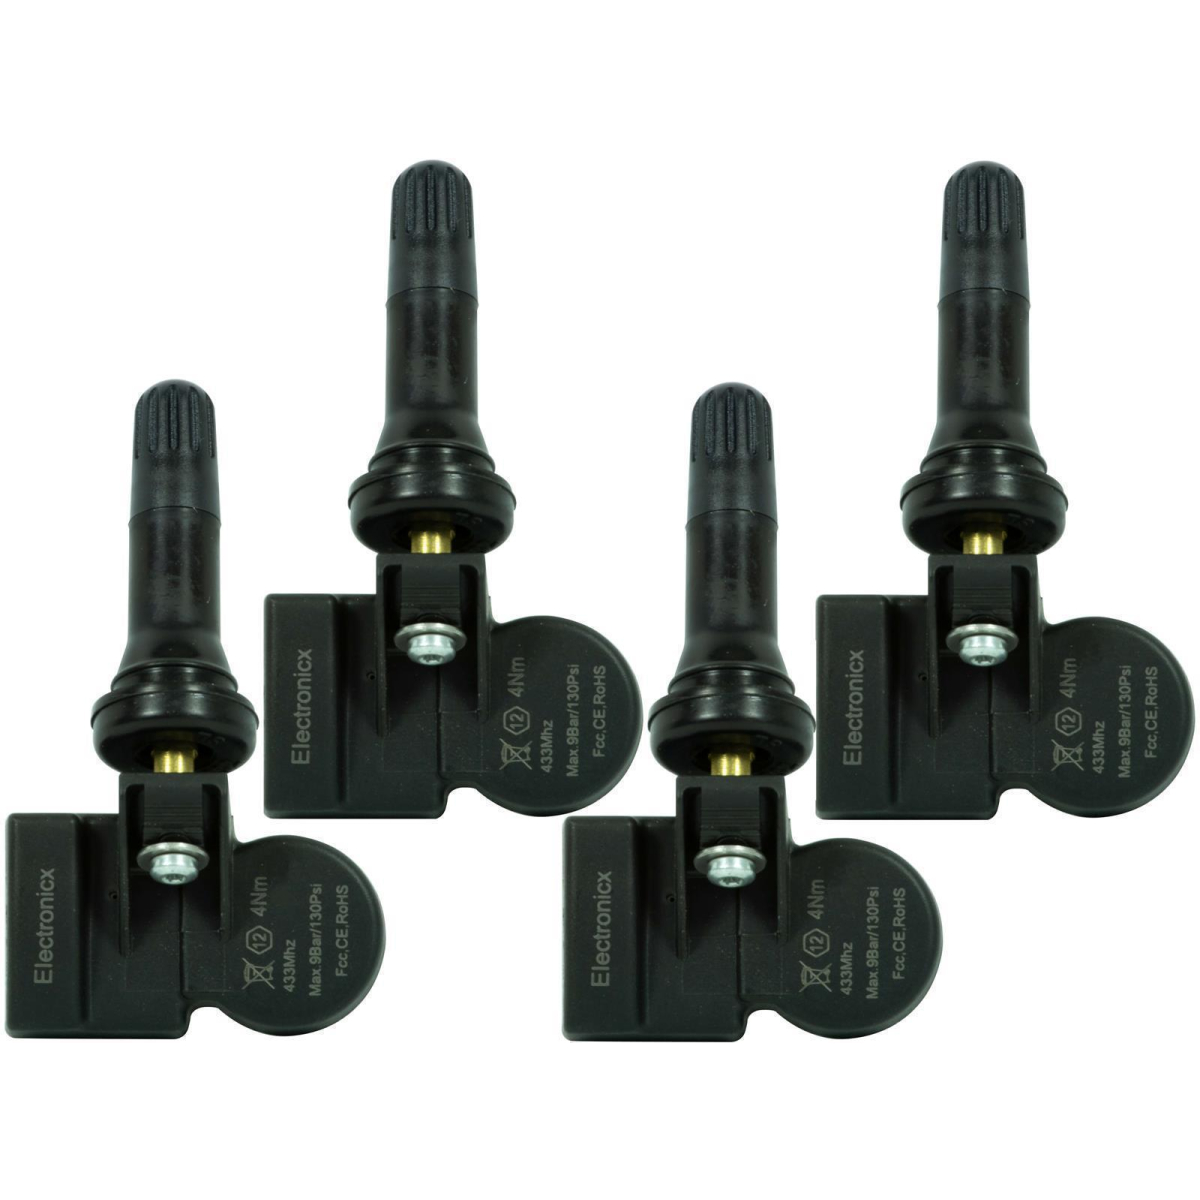 4x RDKS TPMS tire pressure sensors rubber valve for Ford Galaxy Mondeo S-MAX